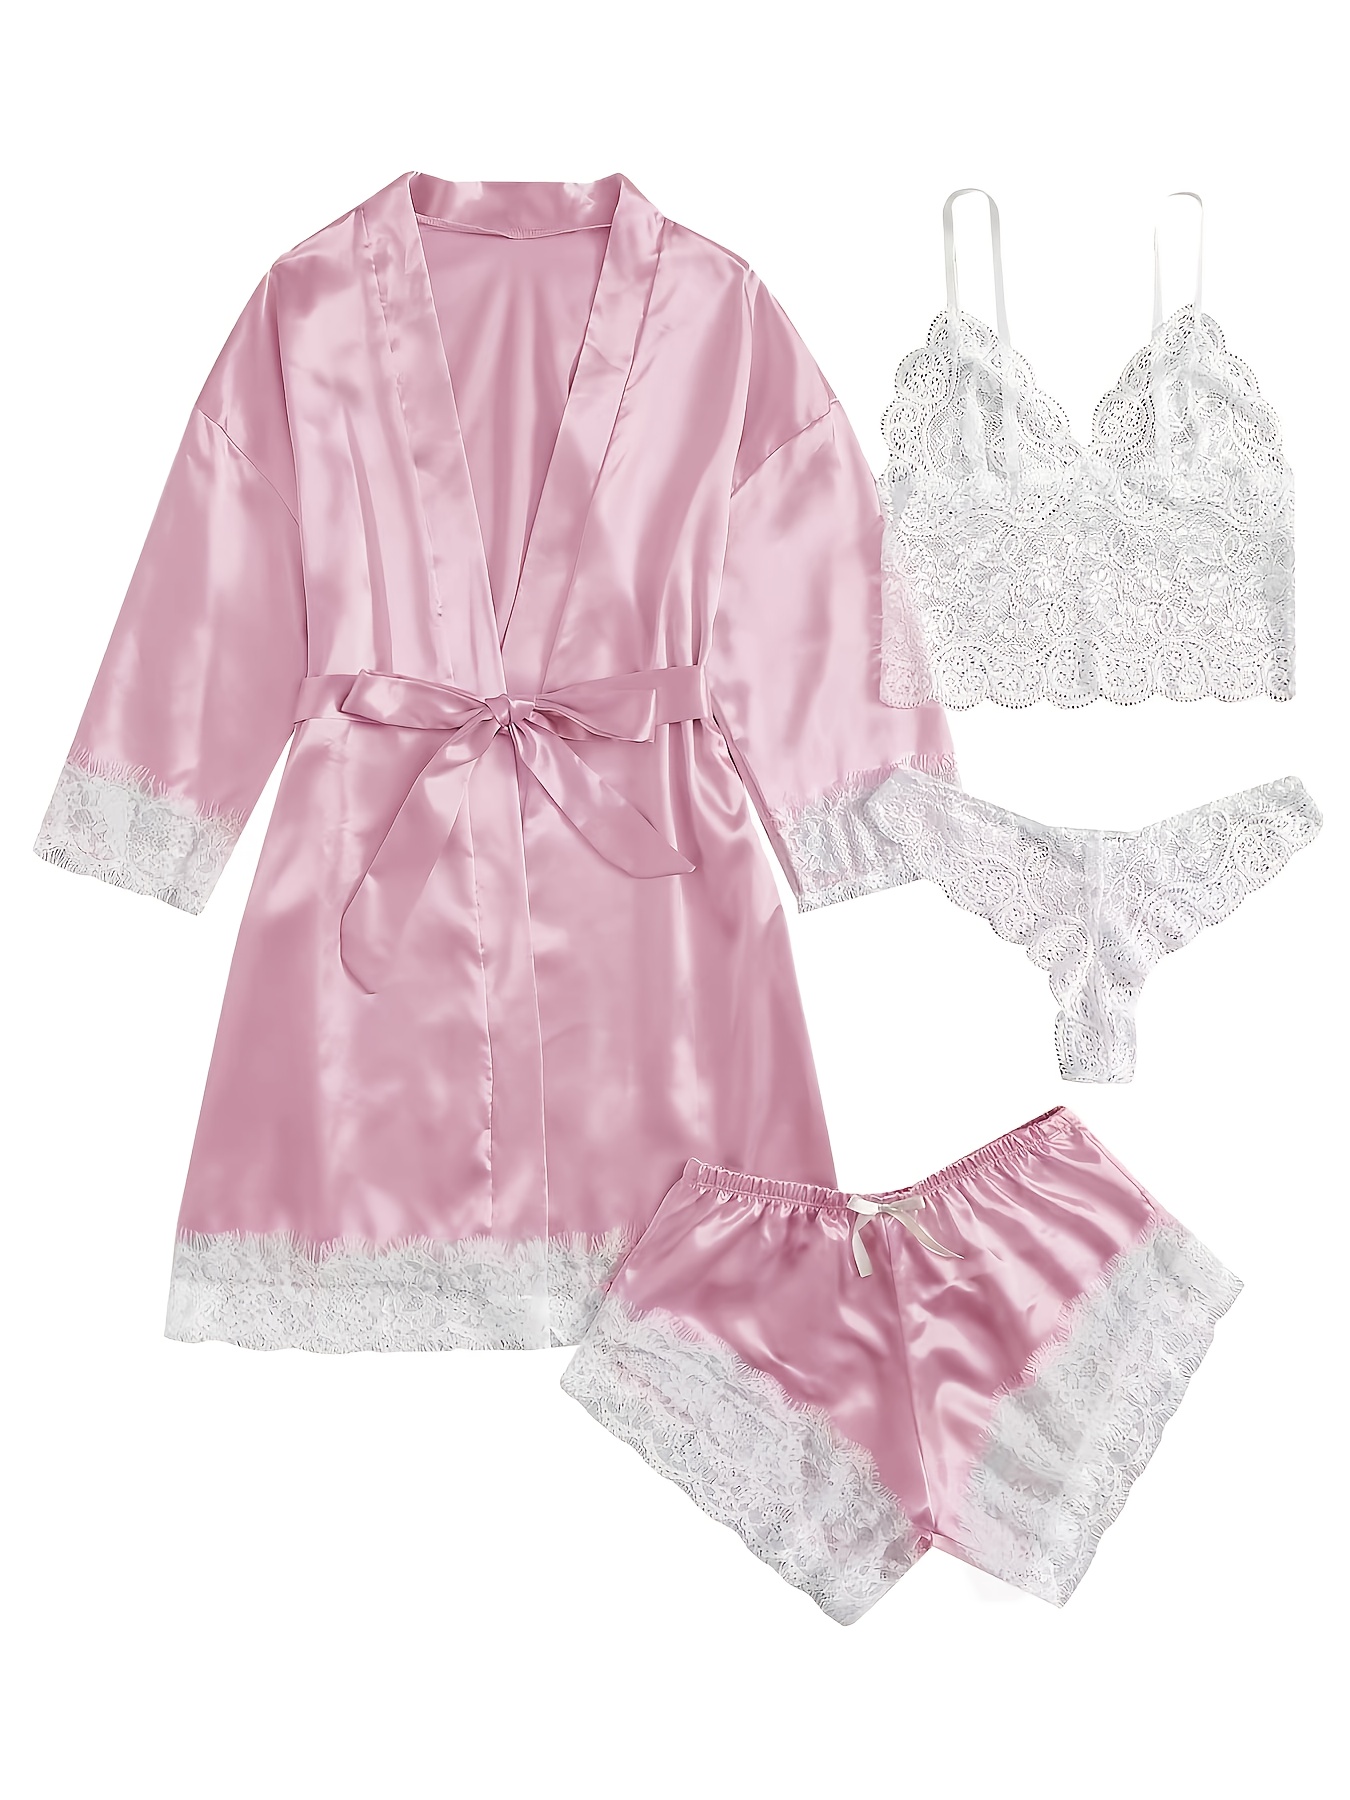 valentine's day Satin Stitching Beauty Back Pajamas Set, Soft Back Cross  Bands Lace Hollow Top & Loose Shorts, Women's Lingerie & Sleepwear